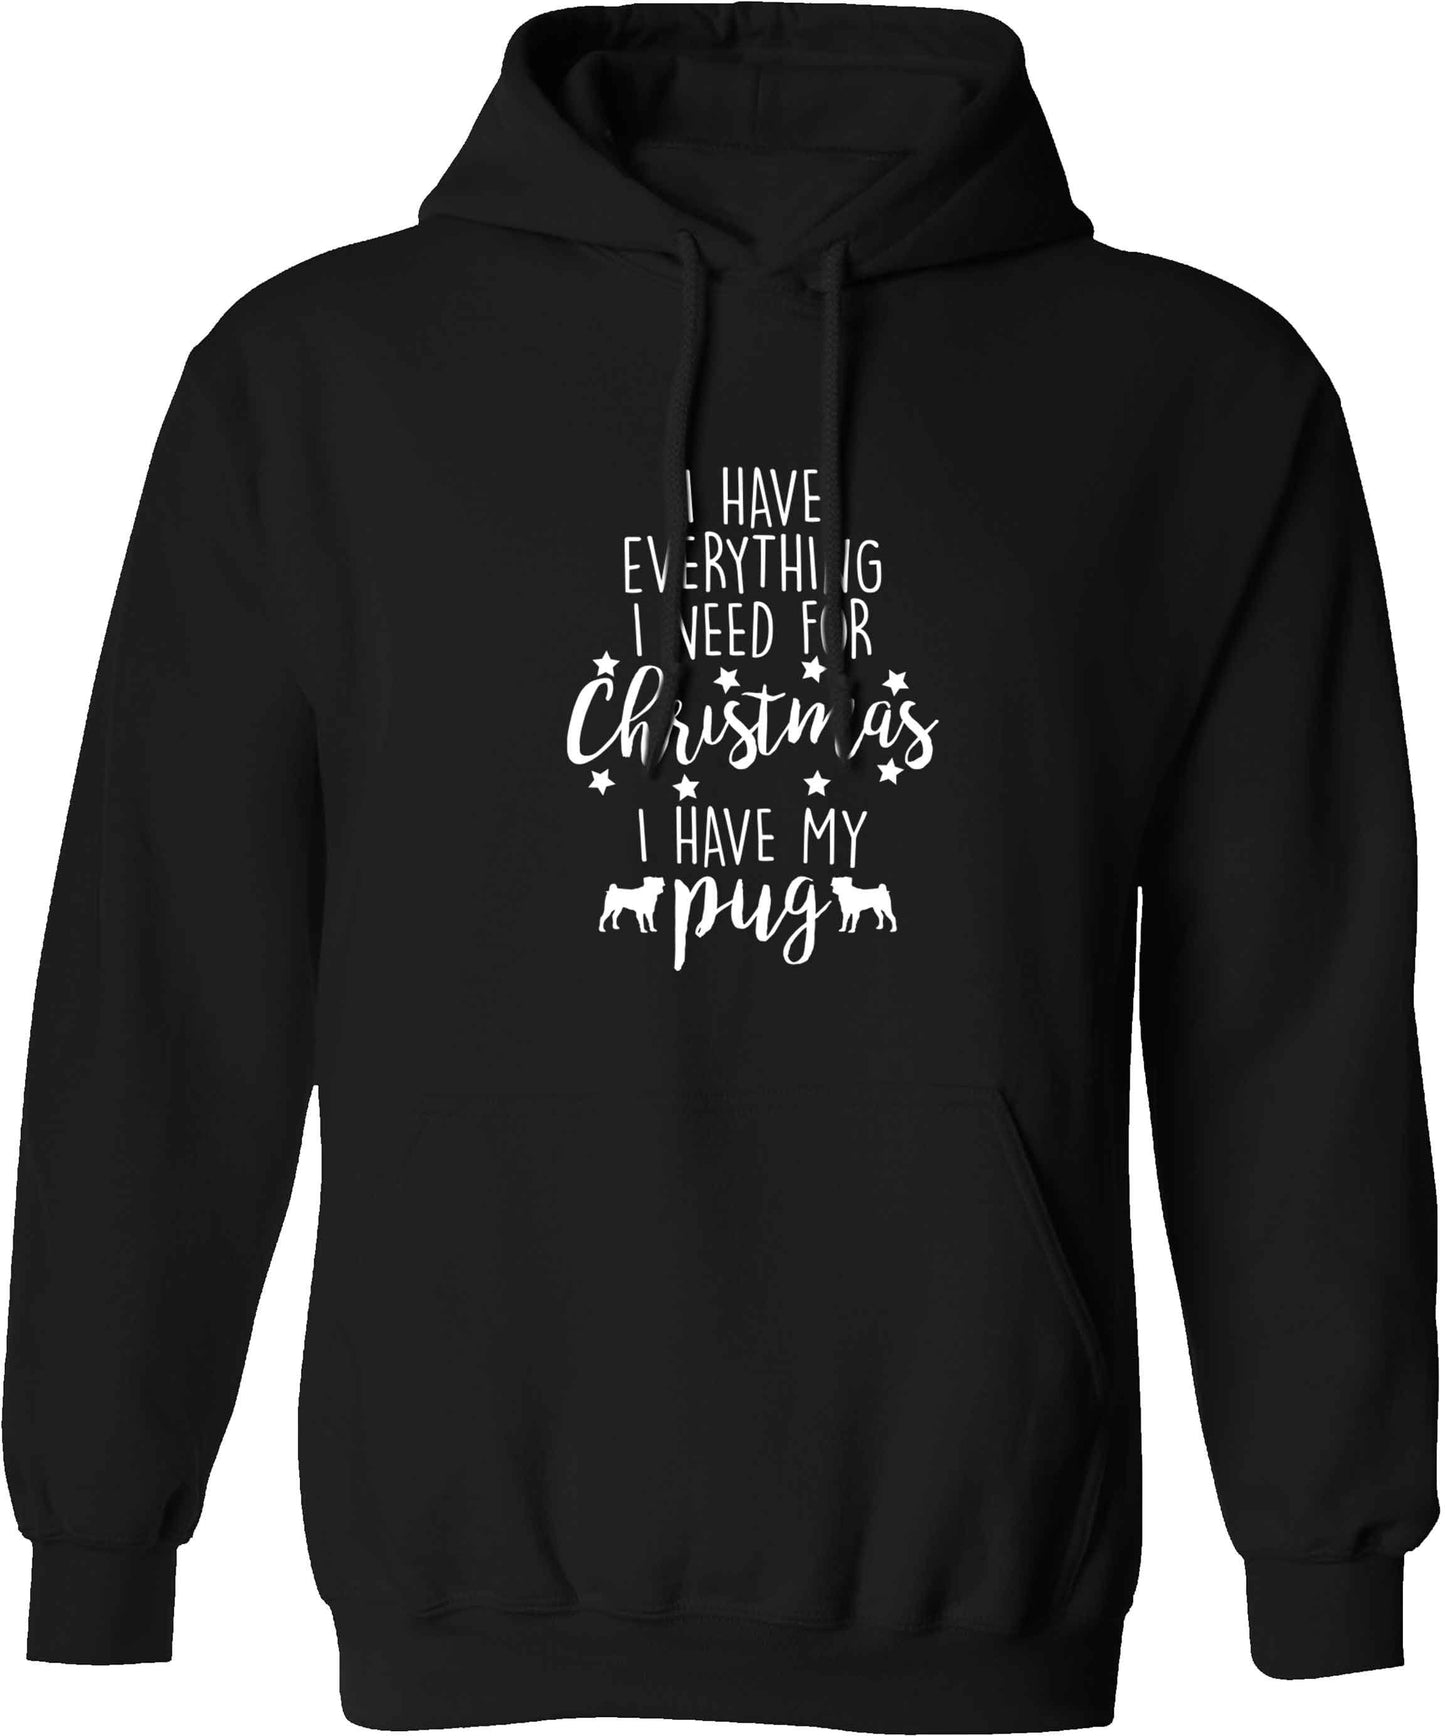 I have everything I need for Christmas I have my pug adults unisex black hoodie 2XL